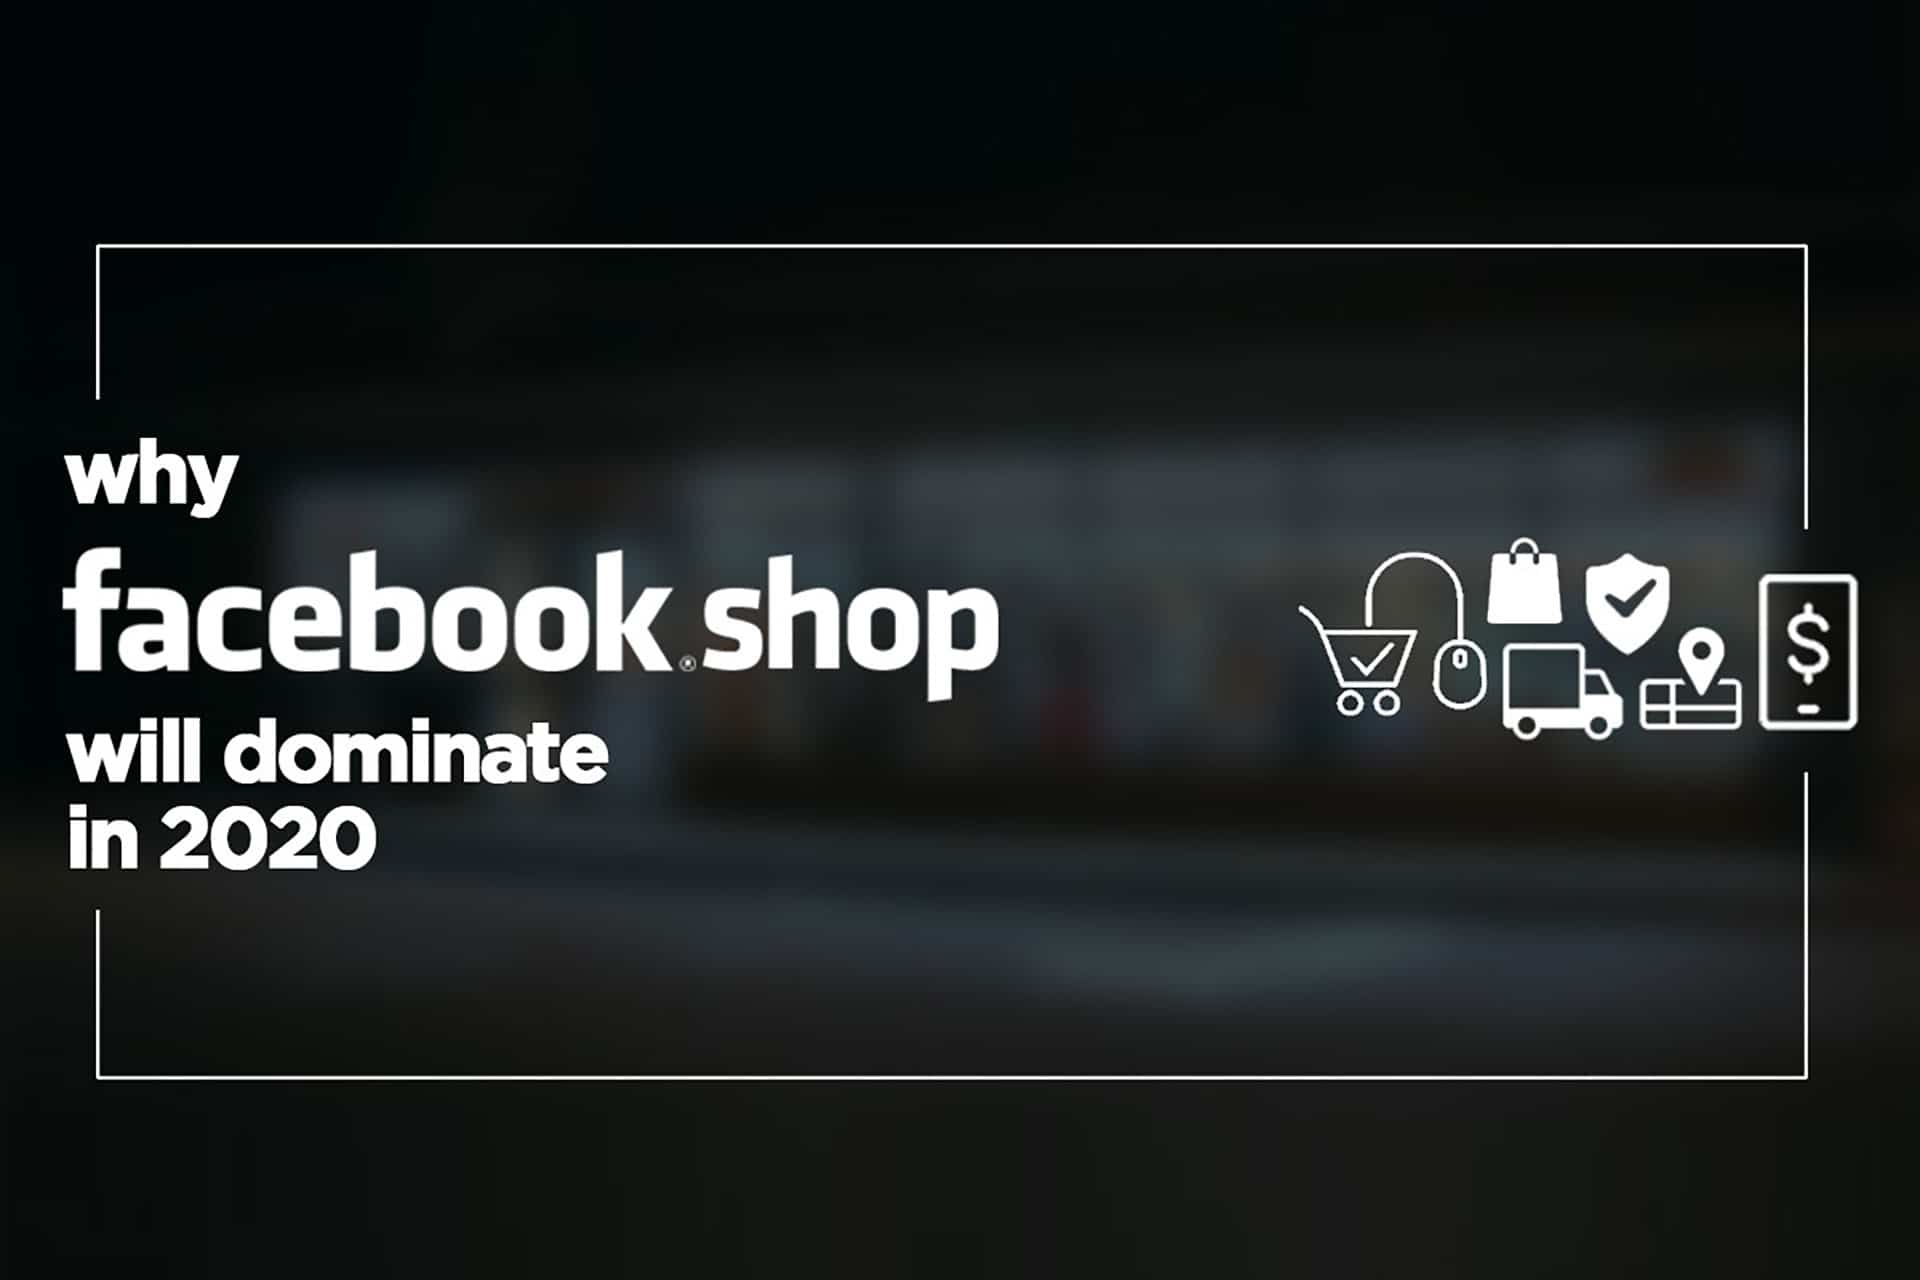 Facebook Shops: A New Way For Small Businesses To Go Online